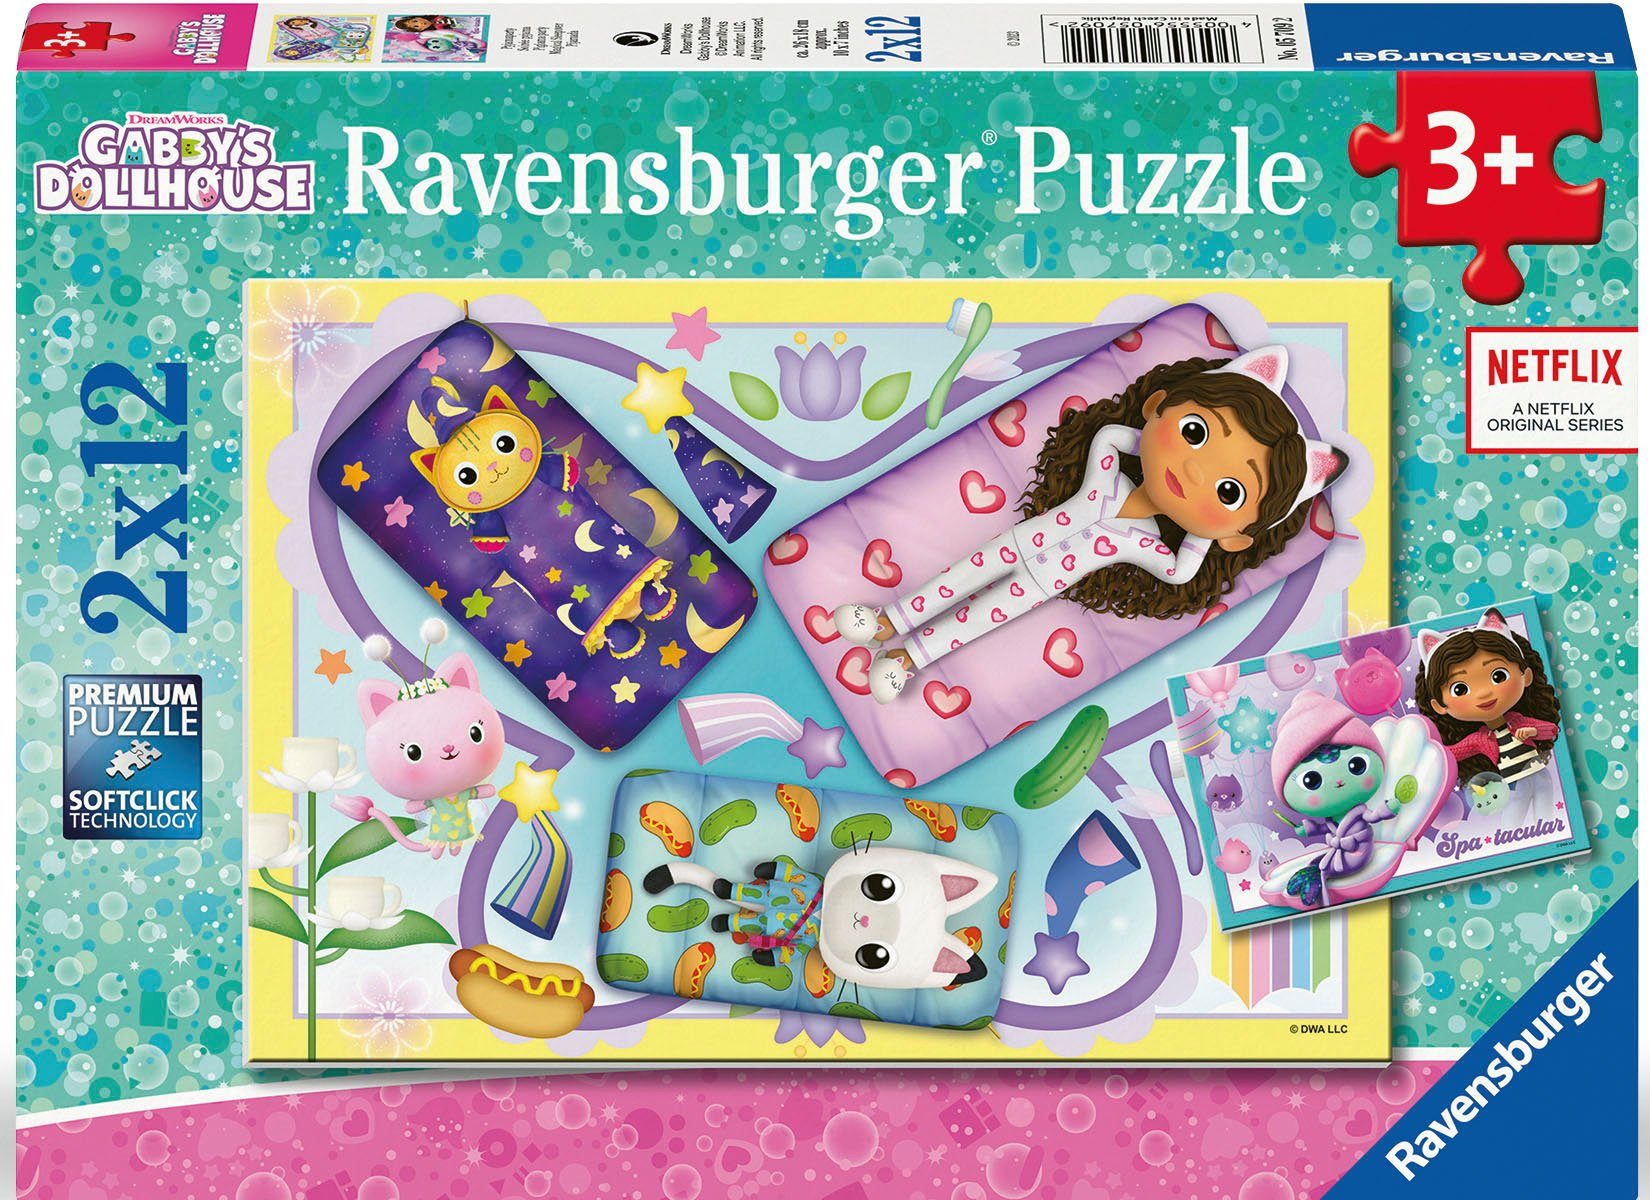 Made Gabby's 2x12, Puzzle 24 Dollhouse, in Puzzleteile, Ravensburger Europe